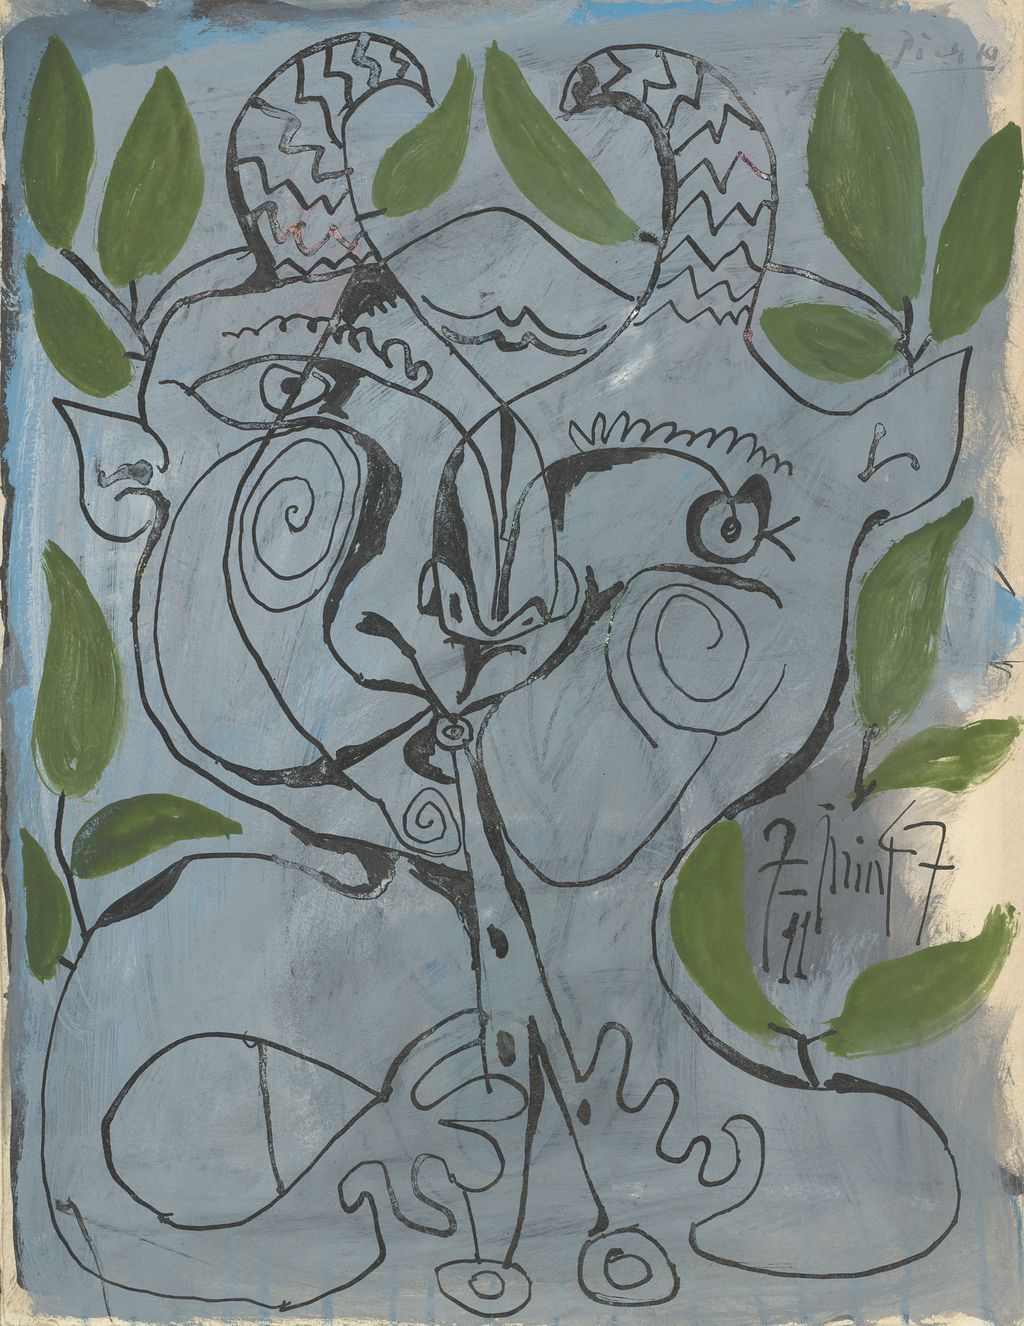 Pablo Picasso. The Faun Musician, 1947. The Art Institute of Chicago, gift of Dorothy Braude Edinburg to the Harry B. and Bessie K. Braude Memorial Collection. © 2013 Estate of Pablo Picasso / Artists Rights Society (ARS), New York.